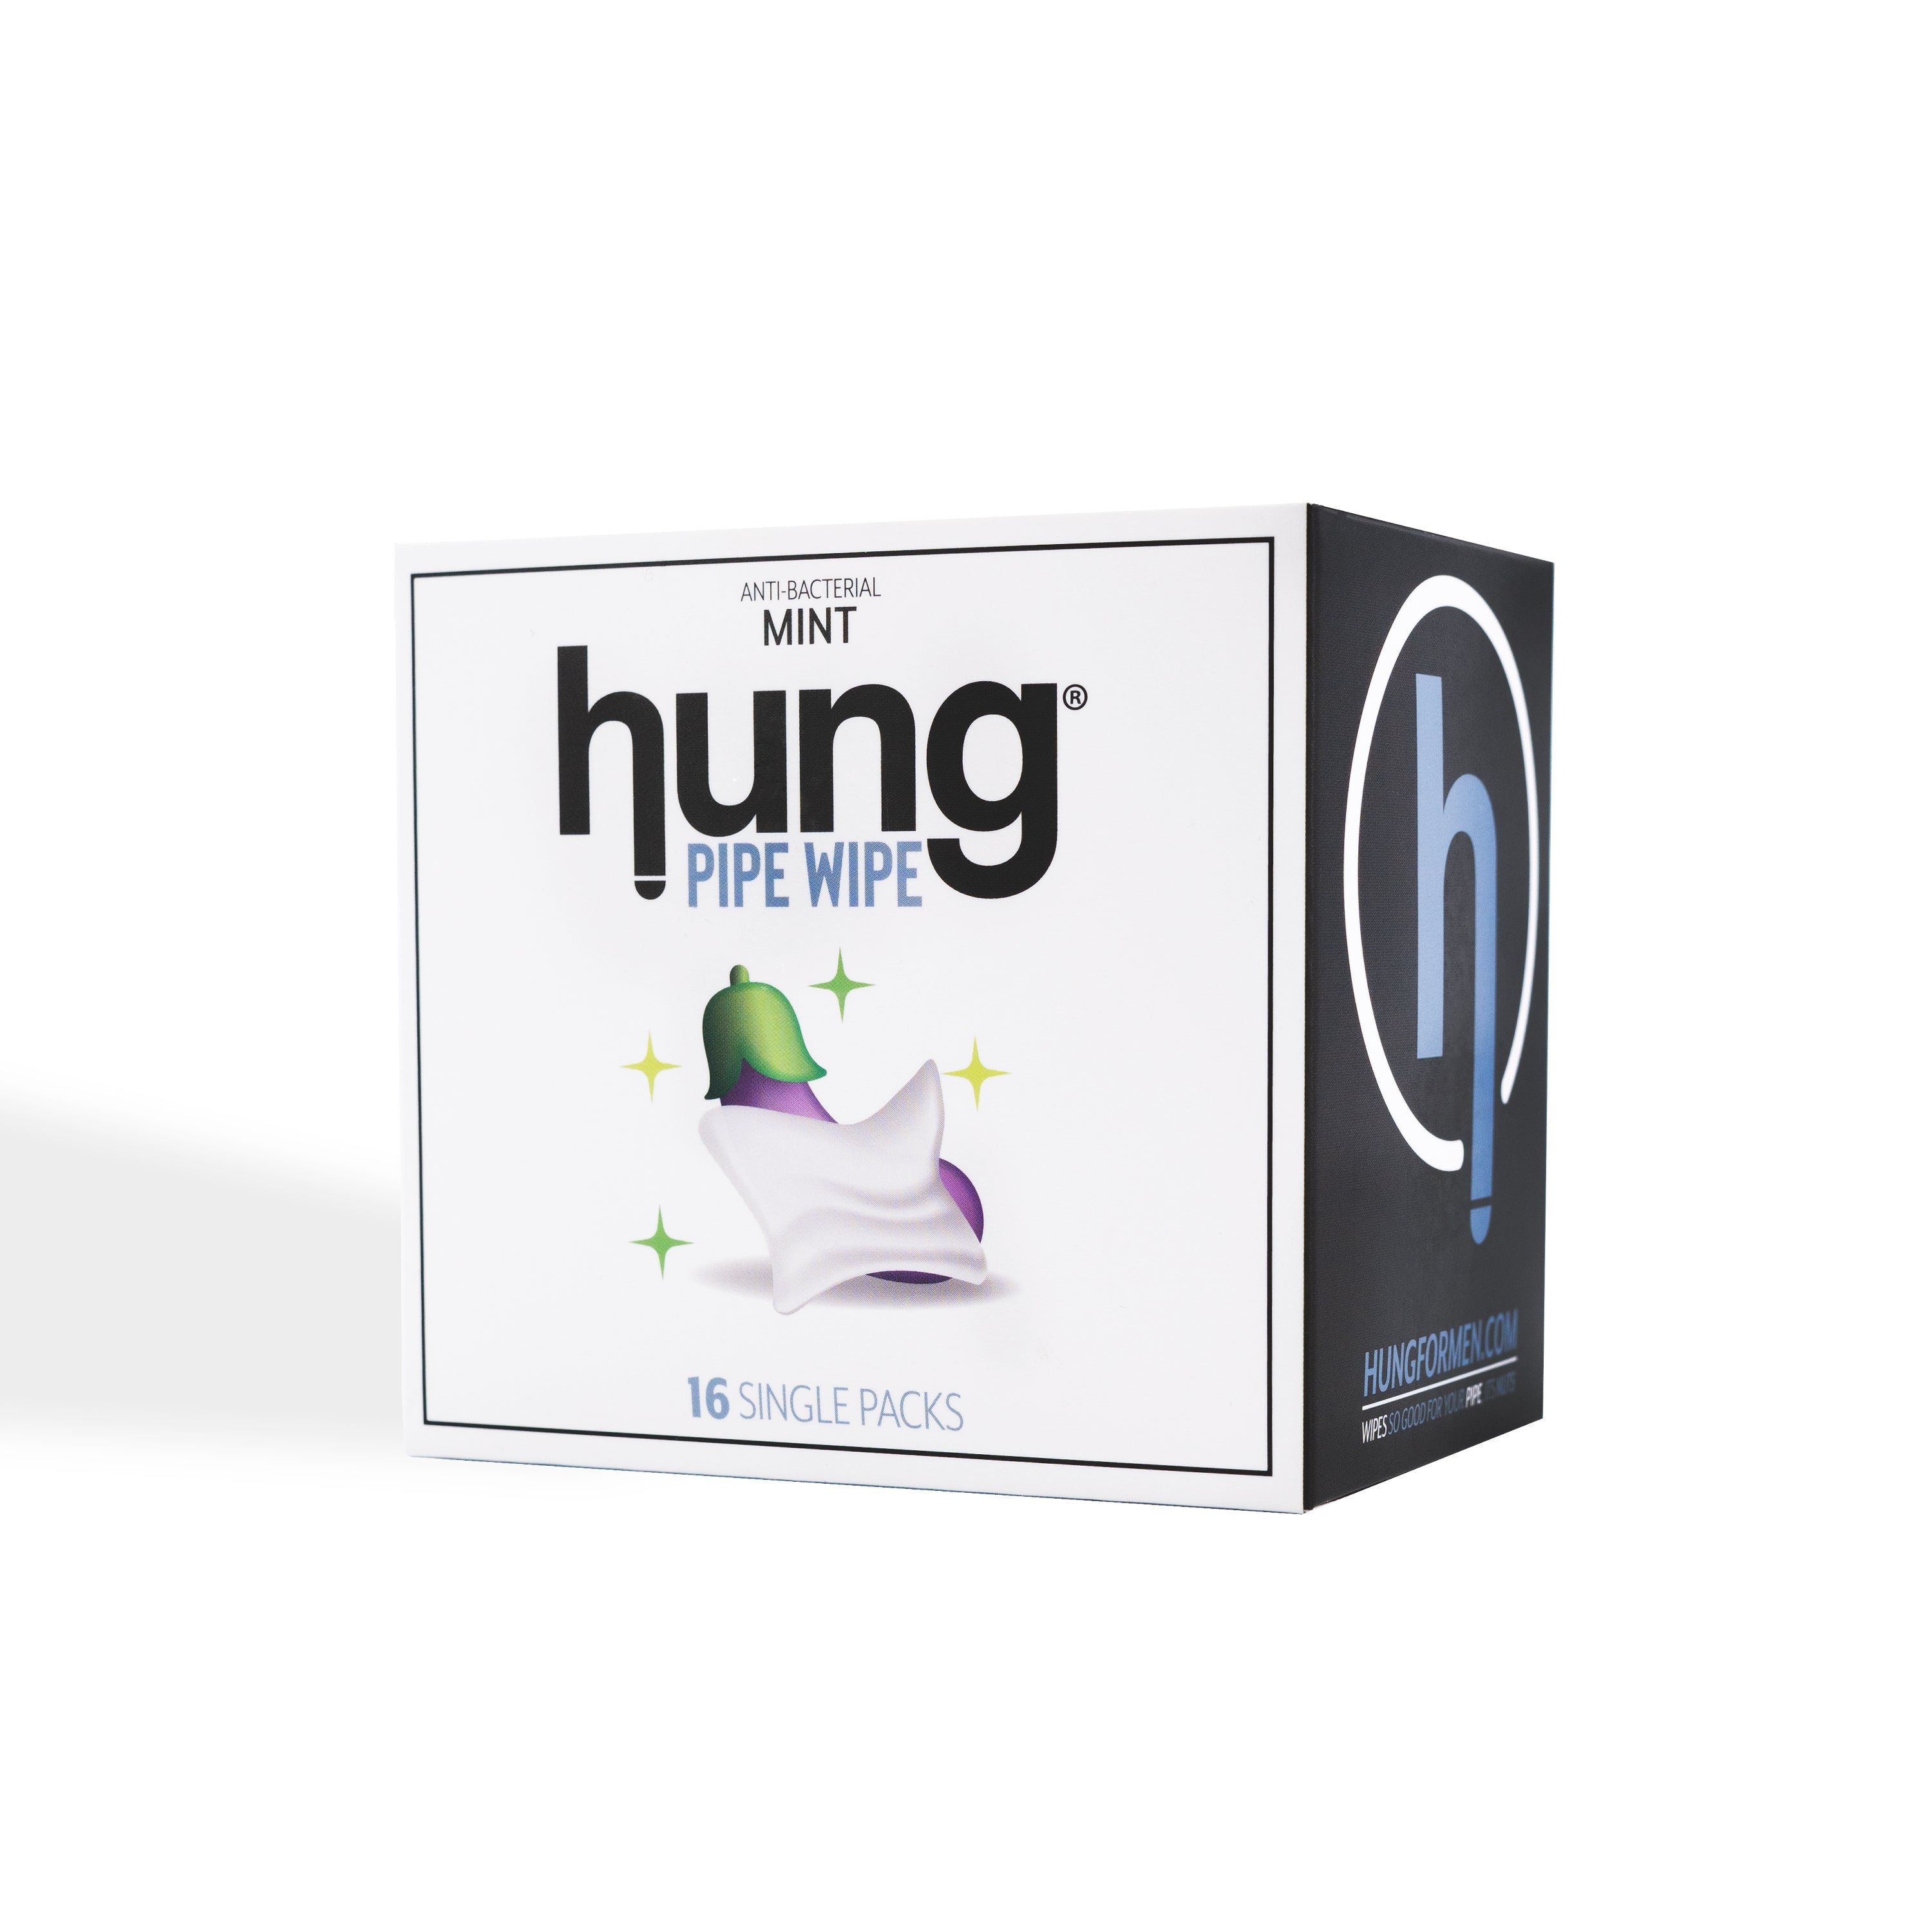 Hung Pipe Wipe 16 Count Box | Refreshing Mint and Lime Towelette for Men